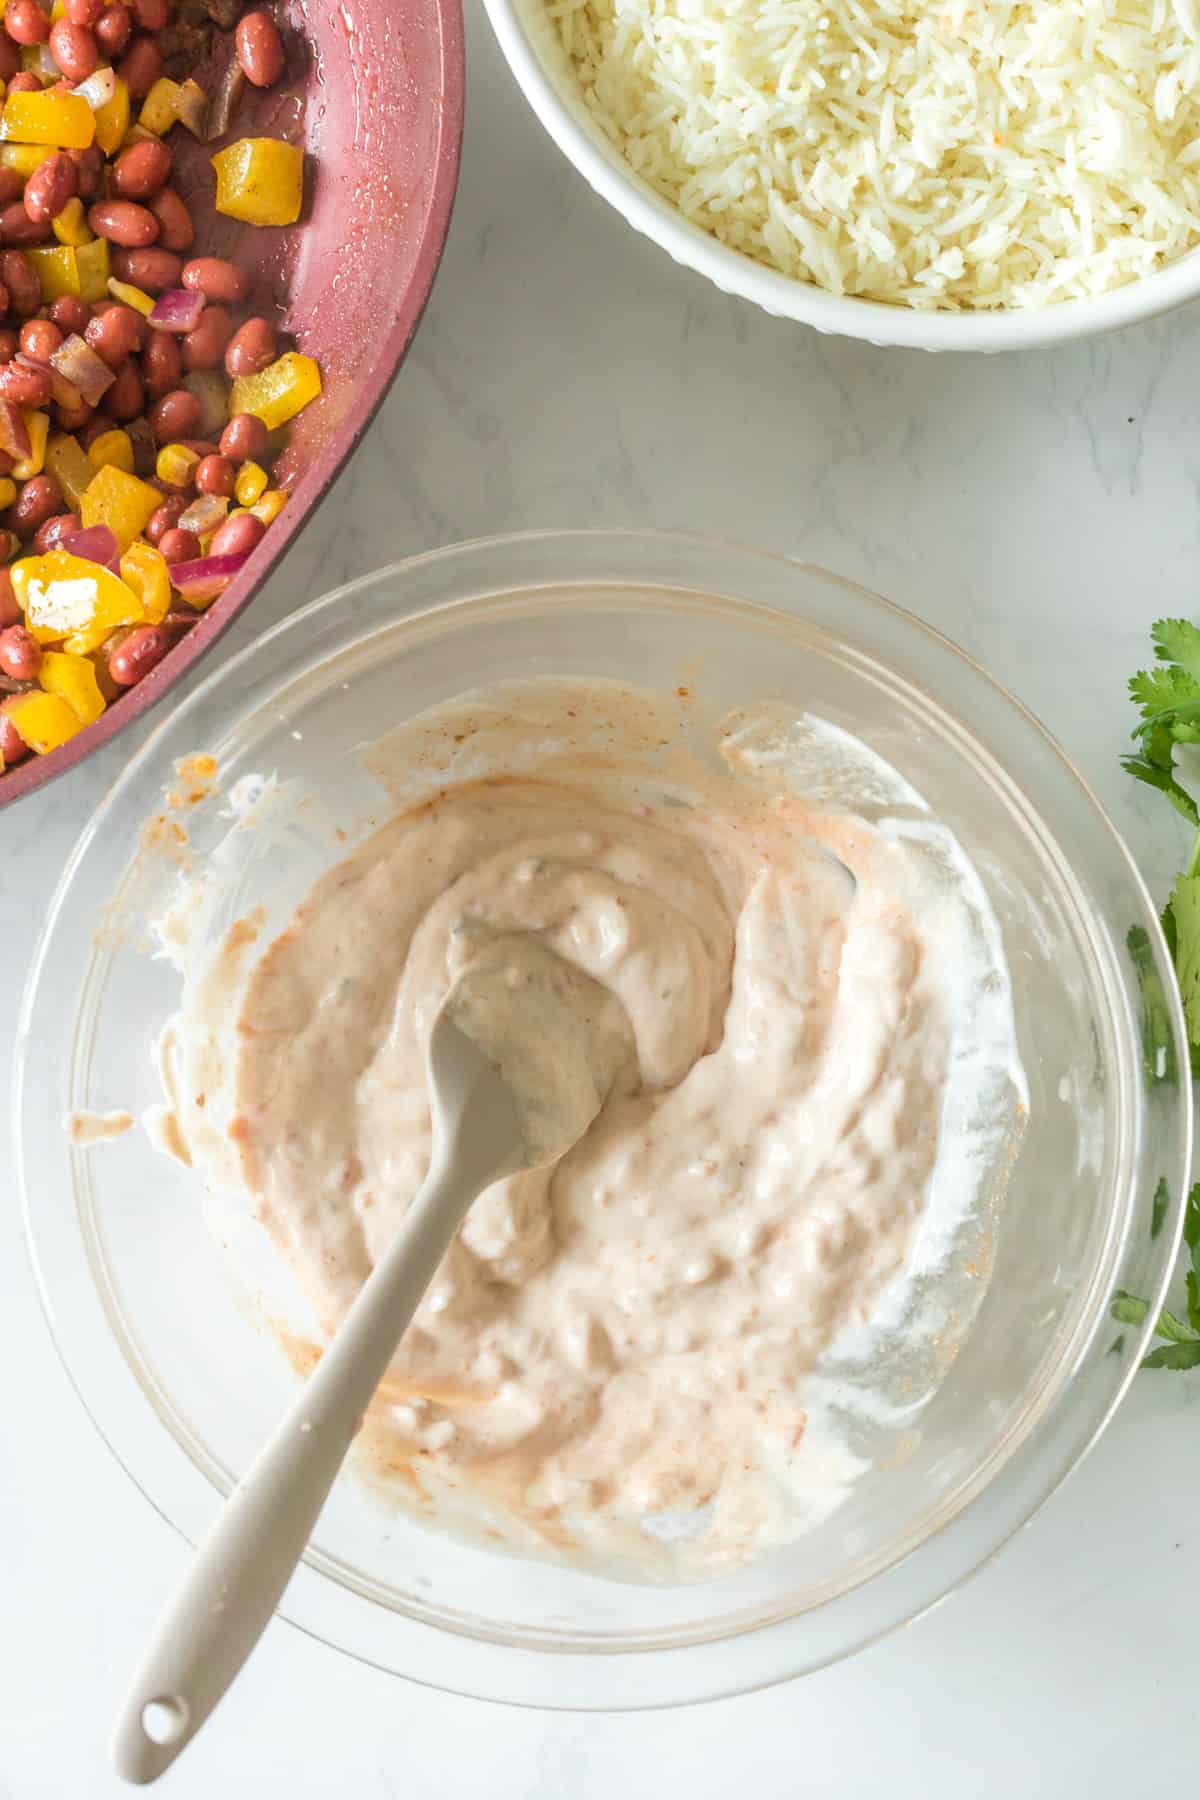 SOUR CREAM AND SALSA MIX IN A BOWL.